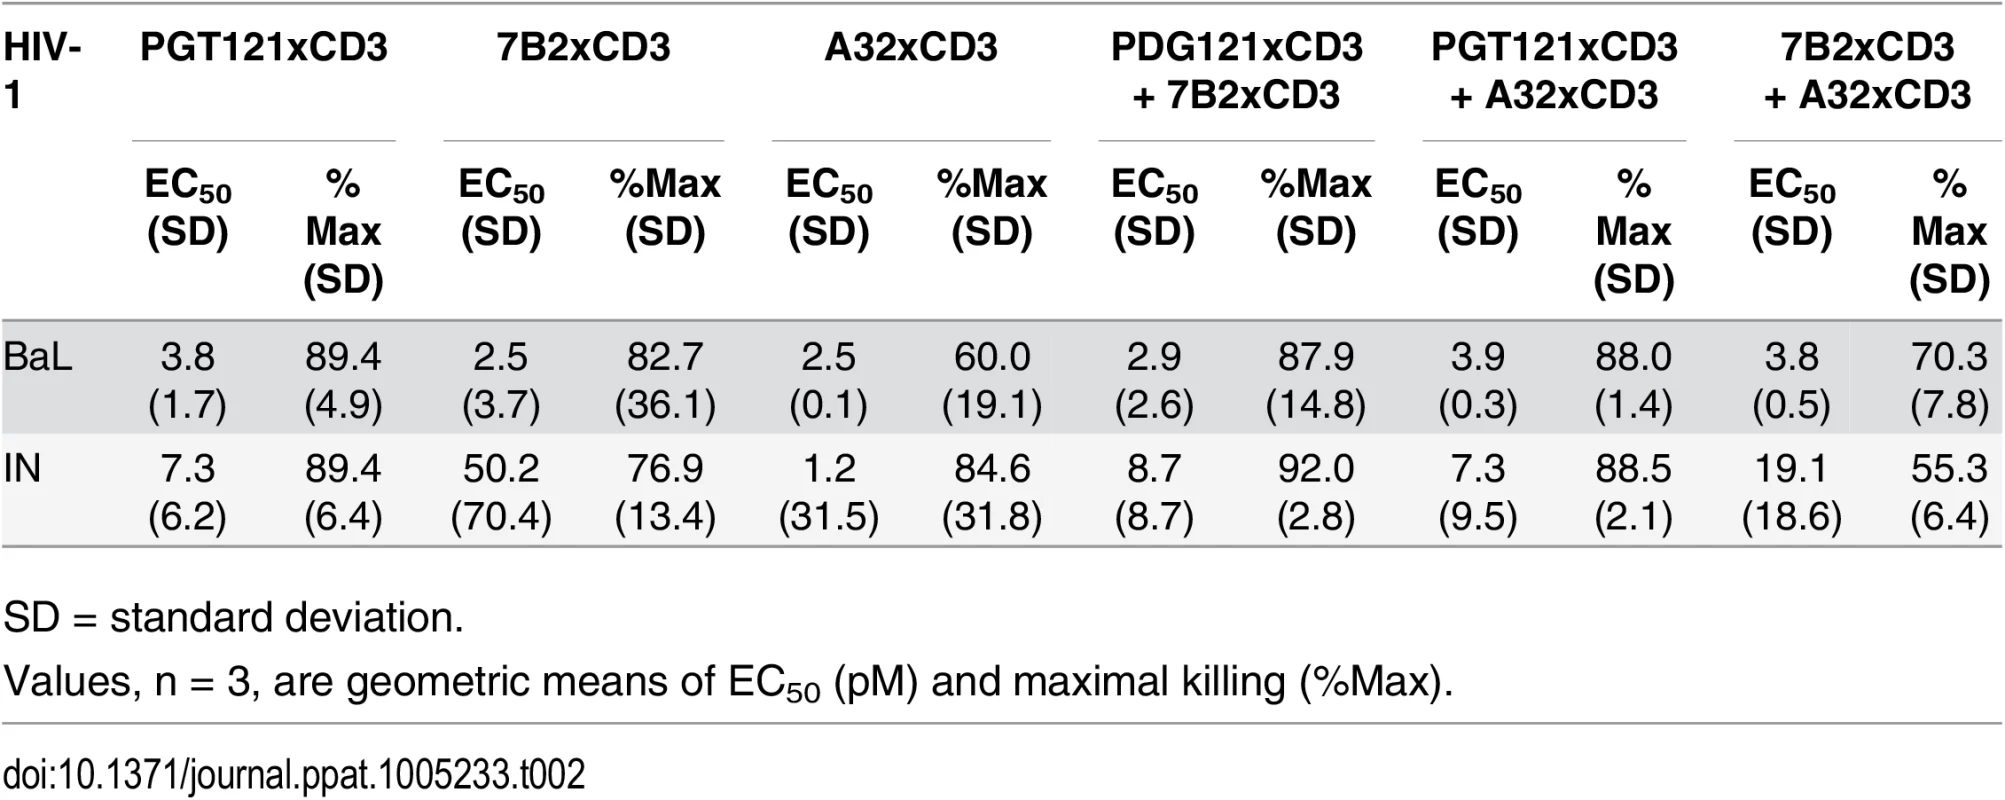 Summary of HIVxCD3 DART combination-mediated killing of HIV-1 infected CD4 T cells in vitro.